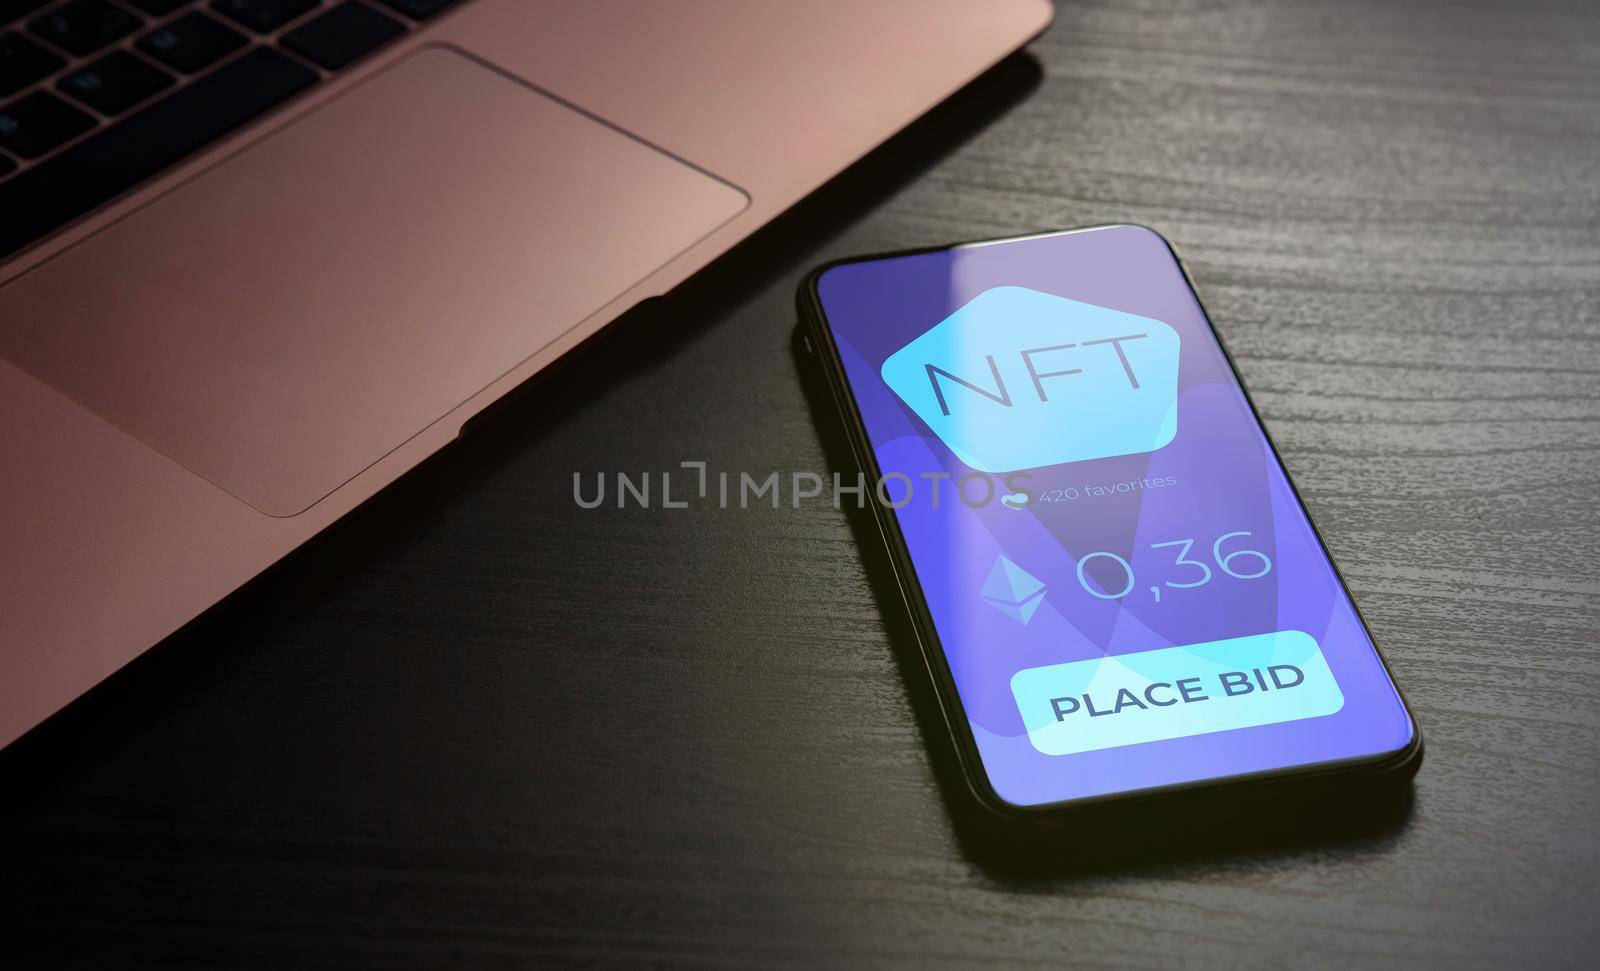 NFT marketplace based on blockchain technology concept. Online Shop with Unique Non-fungible tokens on the screen of a smartphone lying on a wooden table in front of laptop. High quality illustration